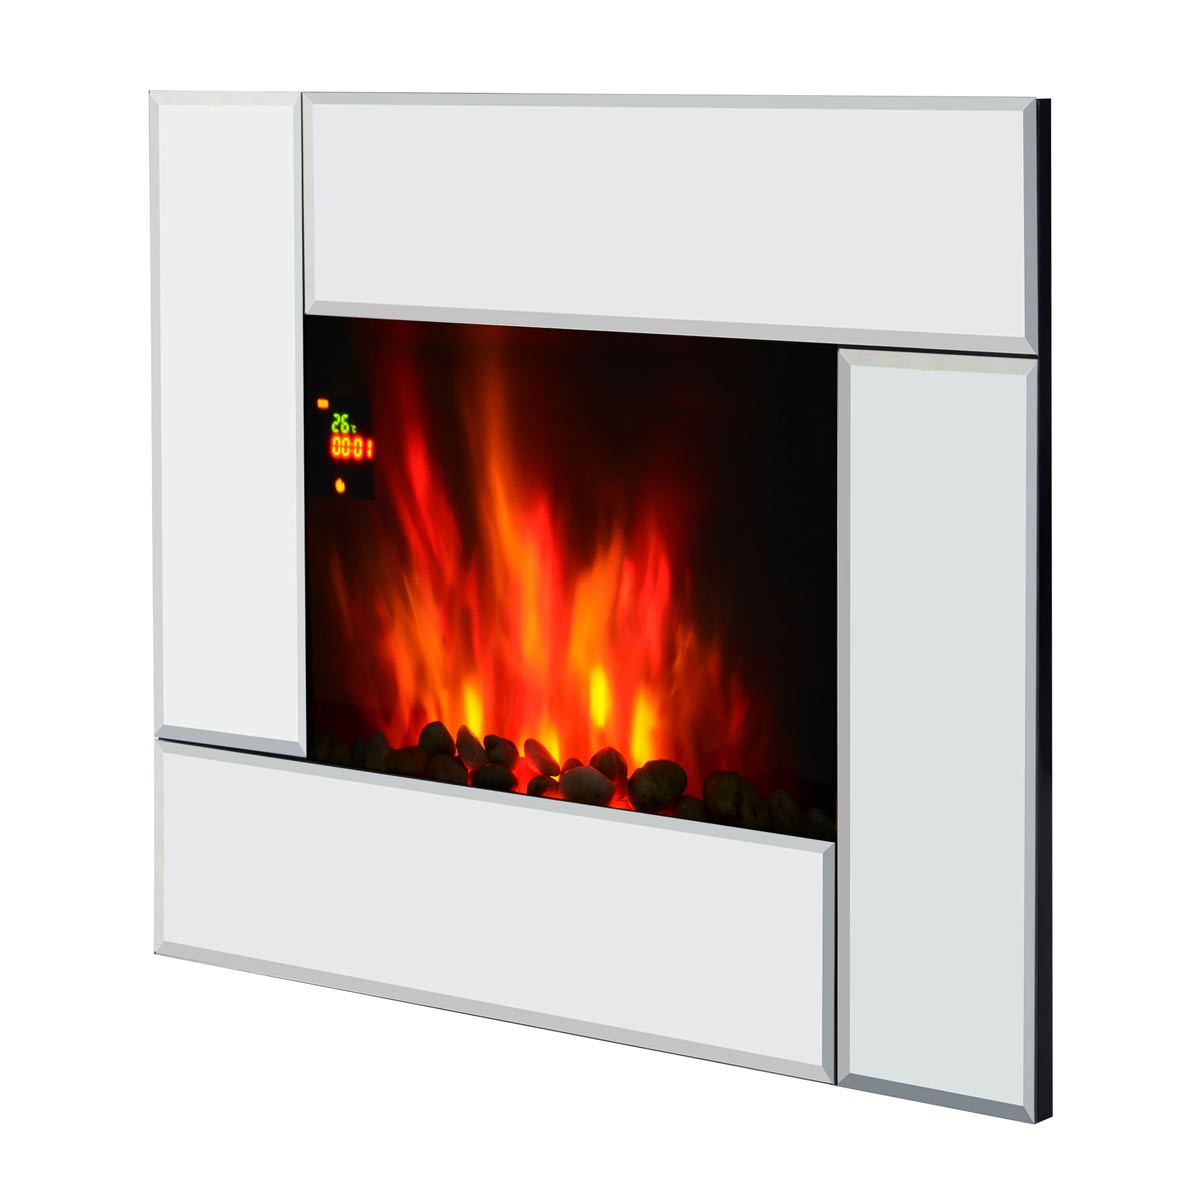 Etna Electric Fireplace Heater Wall Mount With Remote Control Flame Effect